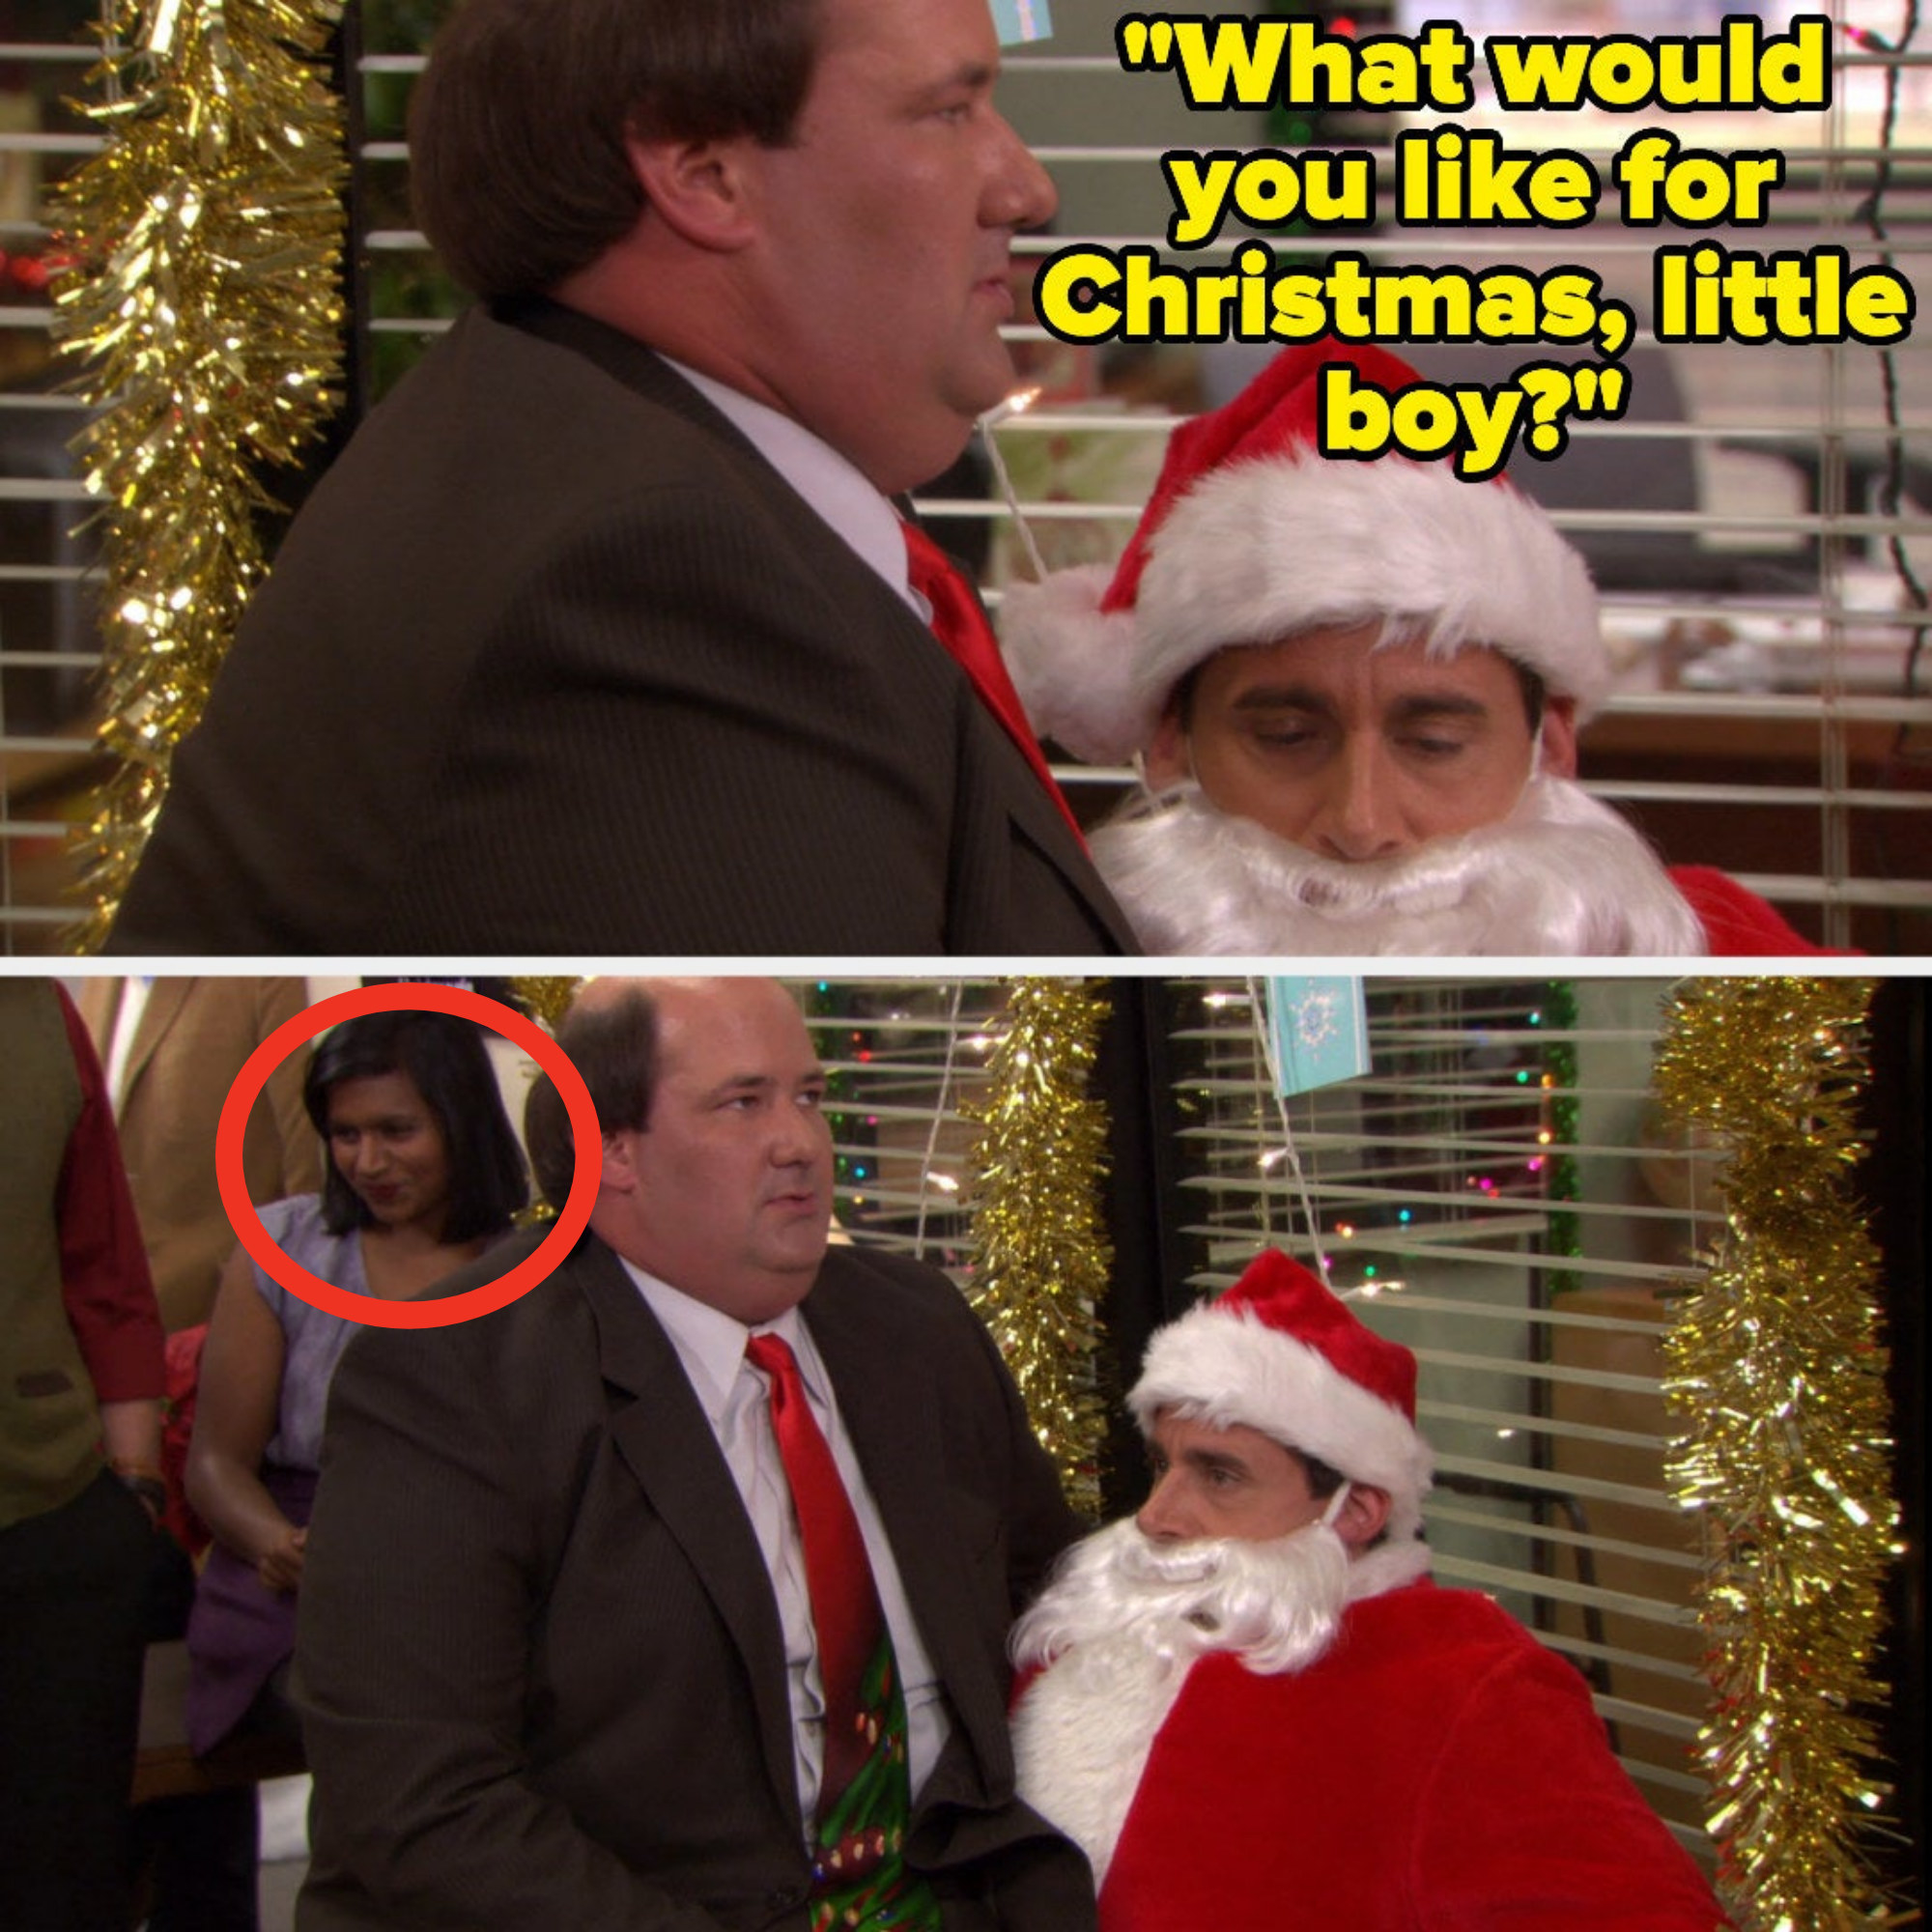 Mindy Kaling sitting behind Michael and Kevin and looking down while clearly holding in a laugh